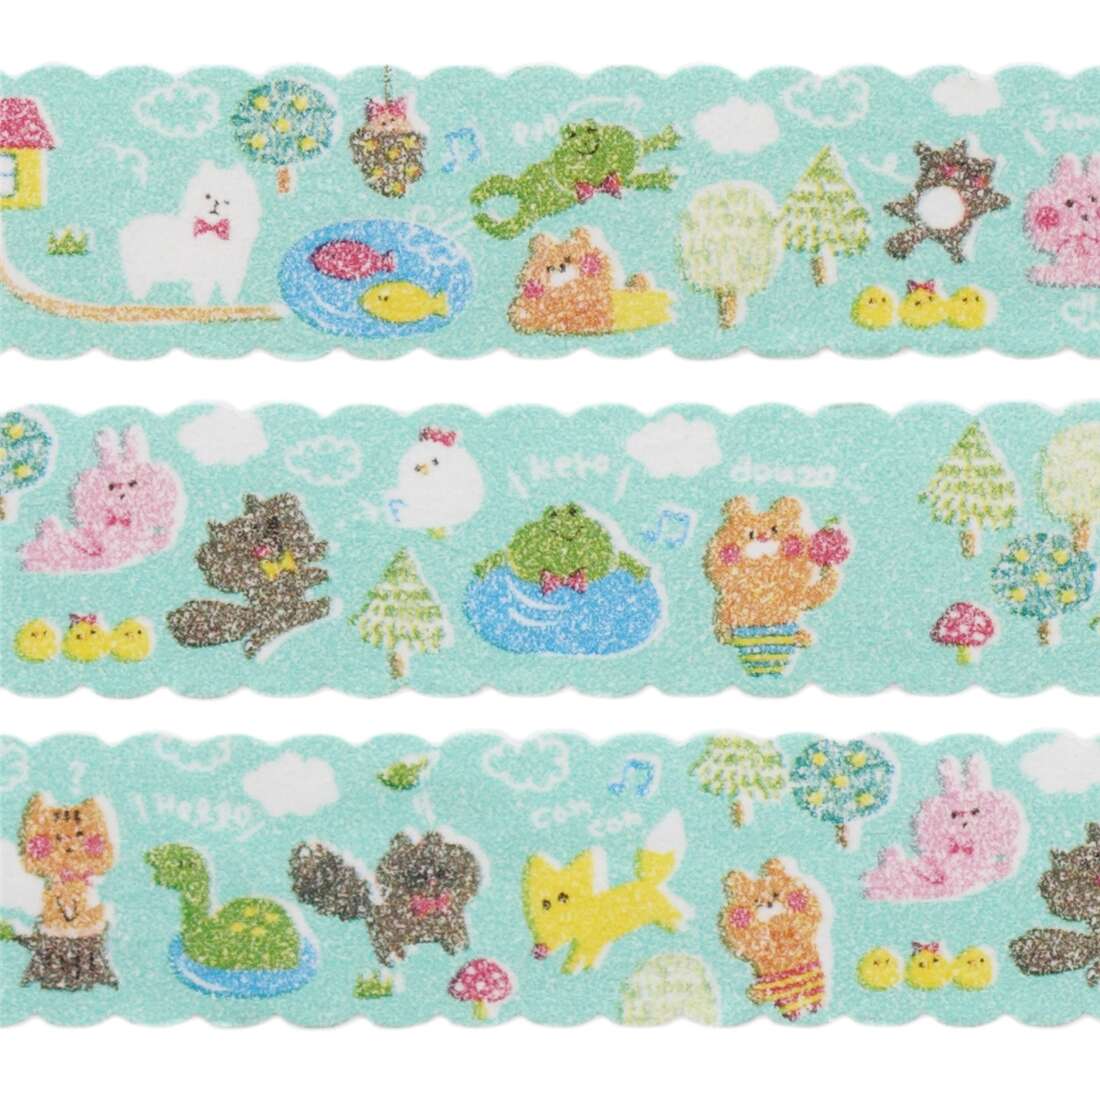 Cute Colorful Animal Deco Tape Sticky Tape By Q Lia Modes4u